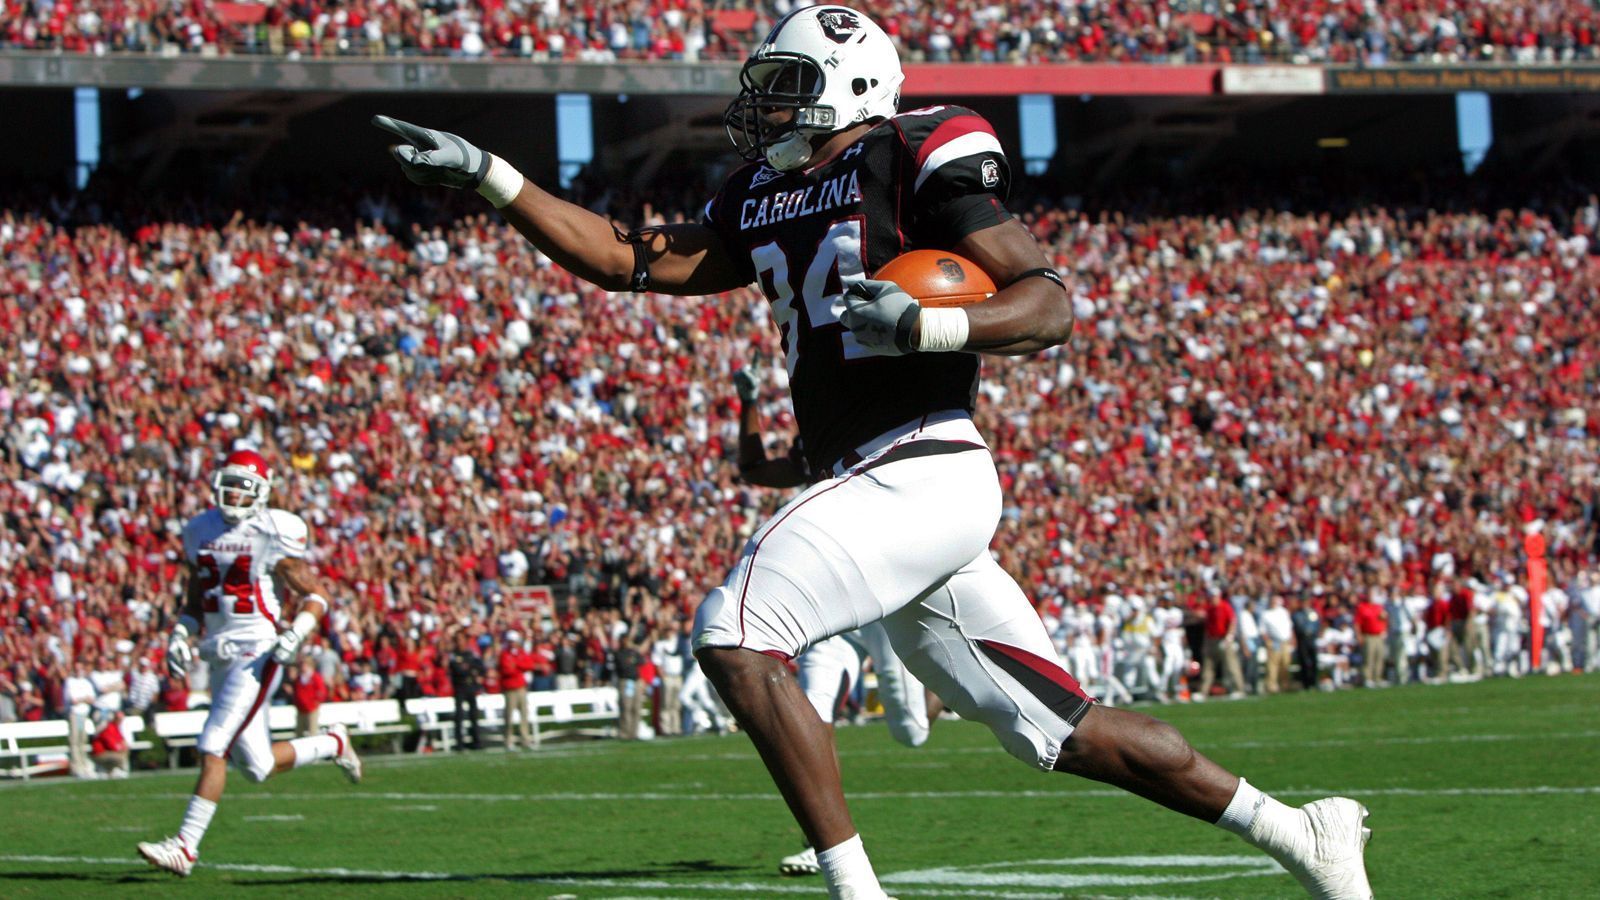 
                <strong>Jared Cook (New Orleans Saints)</strong><br>
                College: South Carolina GamecocksPosition am College: Wide Receiver/Tight EndJahre am College: 3College-Stats: 1107 Receiving Yards - 7 Receiving Touchdowns - 73 ReceptionsGedrafted: 2009 an 89. Stelle von den Tennessee Titans
              